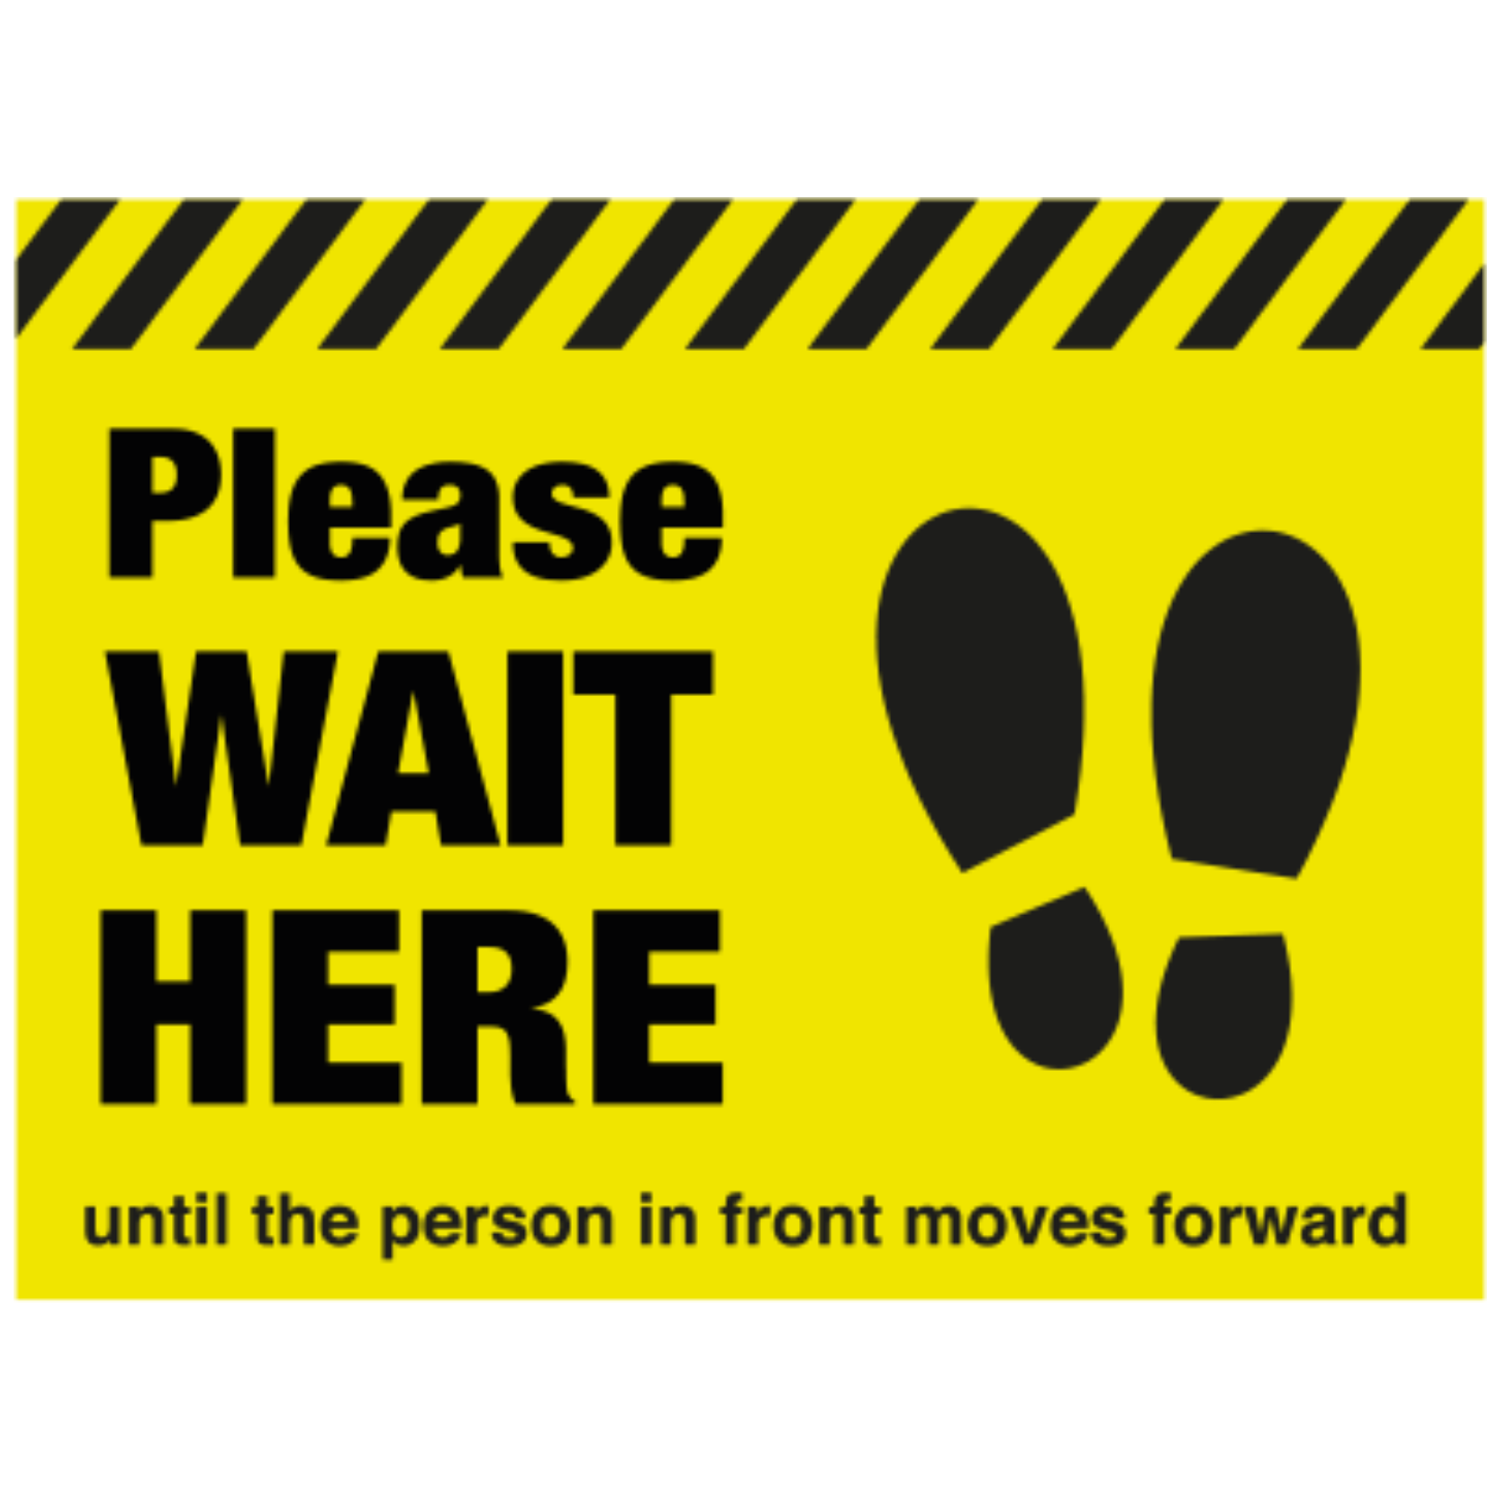 Please wait here until the person in front moves forwards floor sign